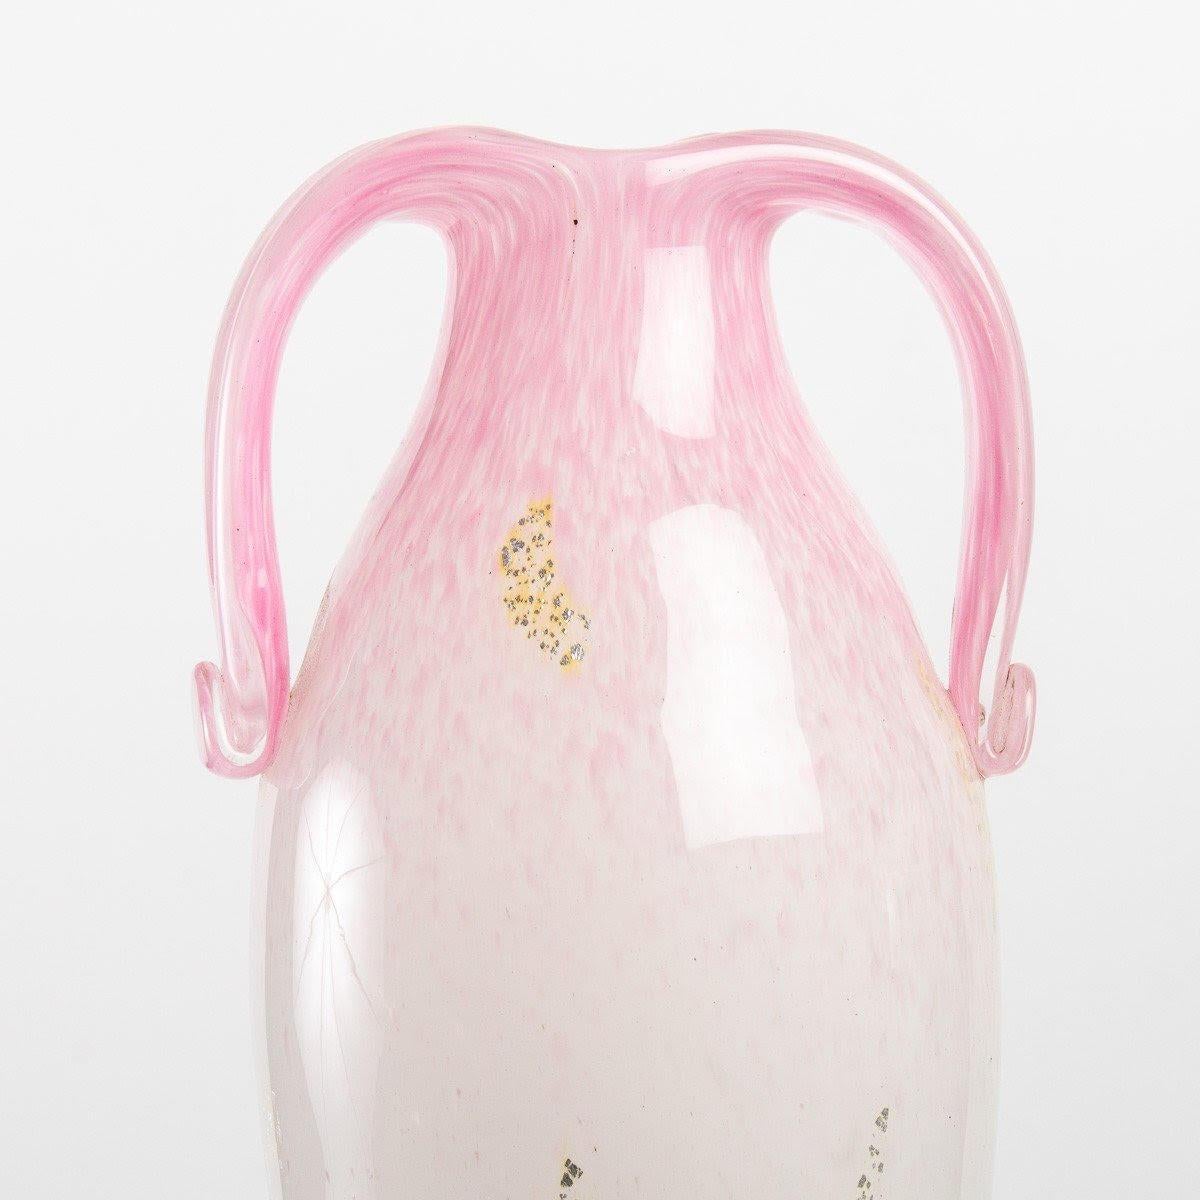 Large Baluster Vase by the Artist André Delatte, Art Nouveau.

Glass vase by André Delatte, Art Nouveau period, circa 1900.
H: 48cm , D: 13cm